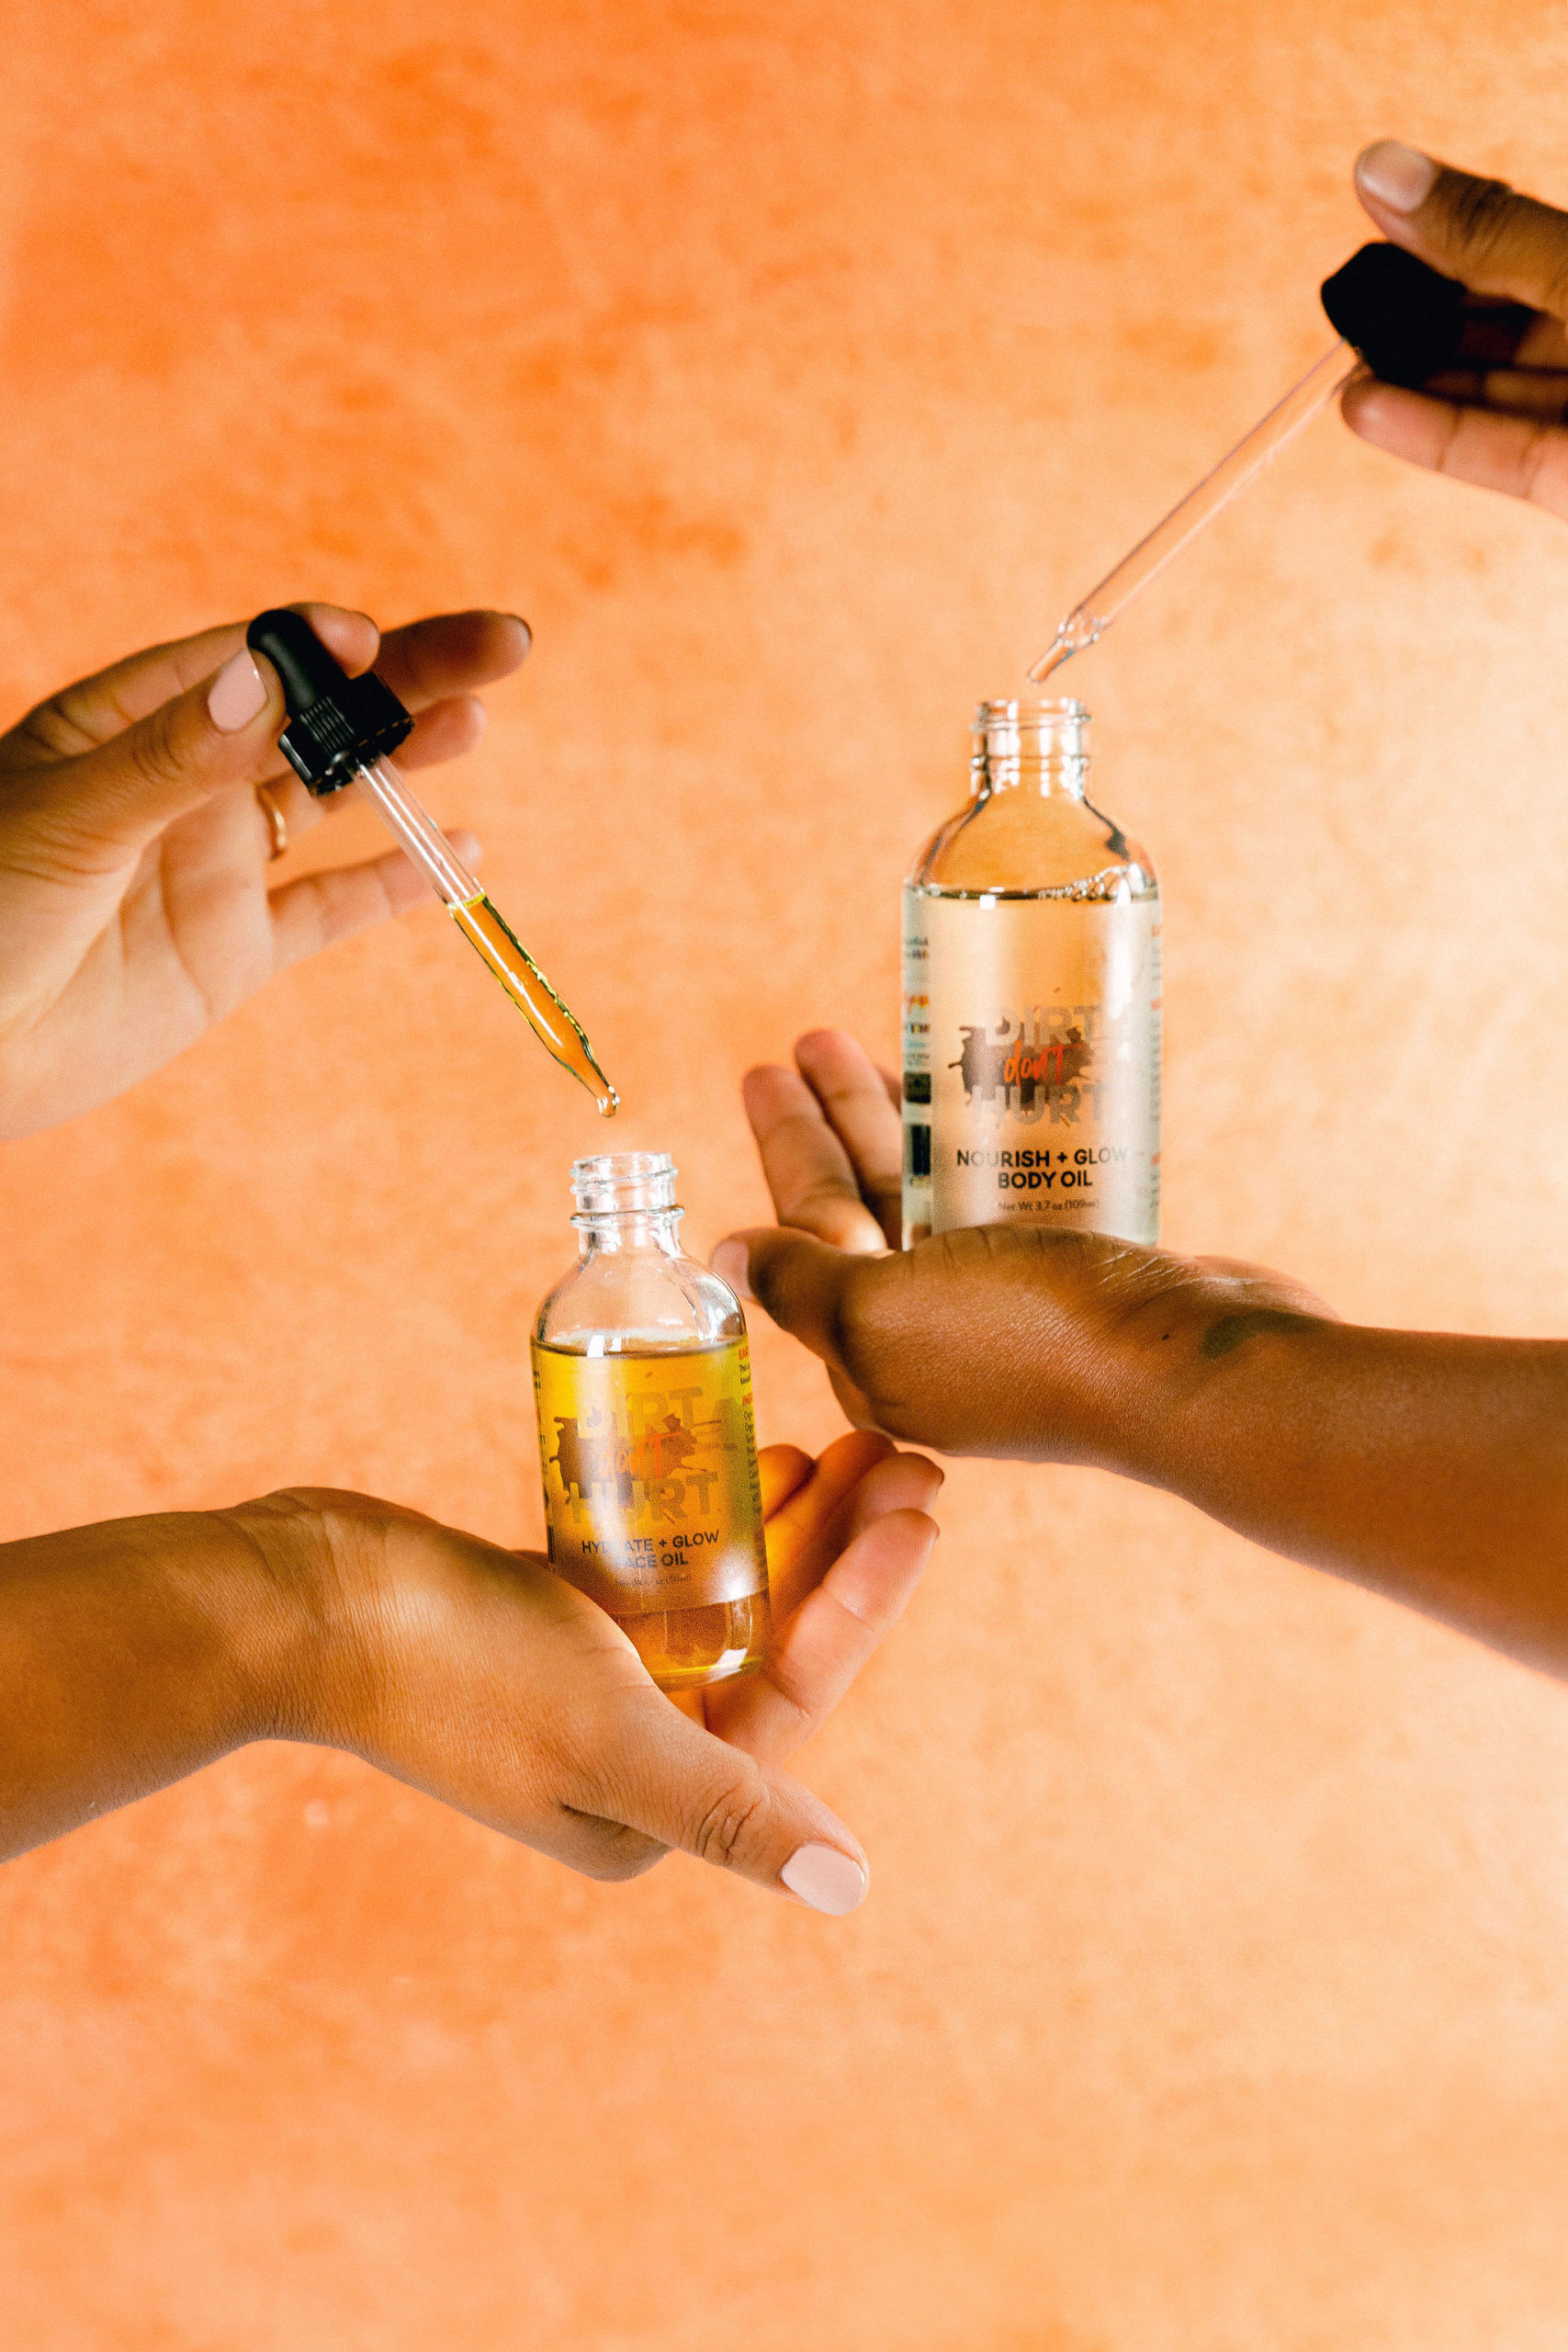 Styled skincare product photography body oils in hands using droppers black owned small business